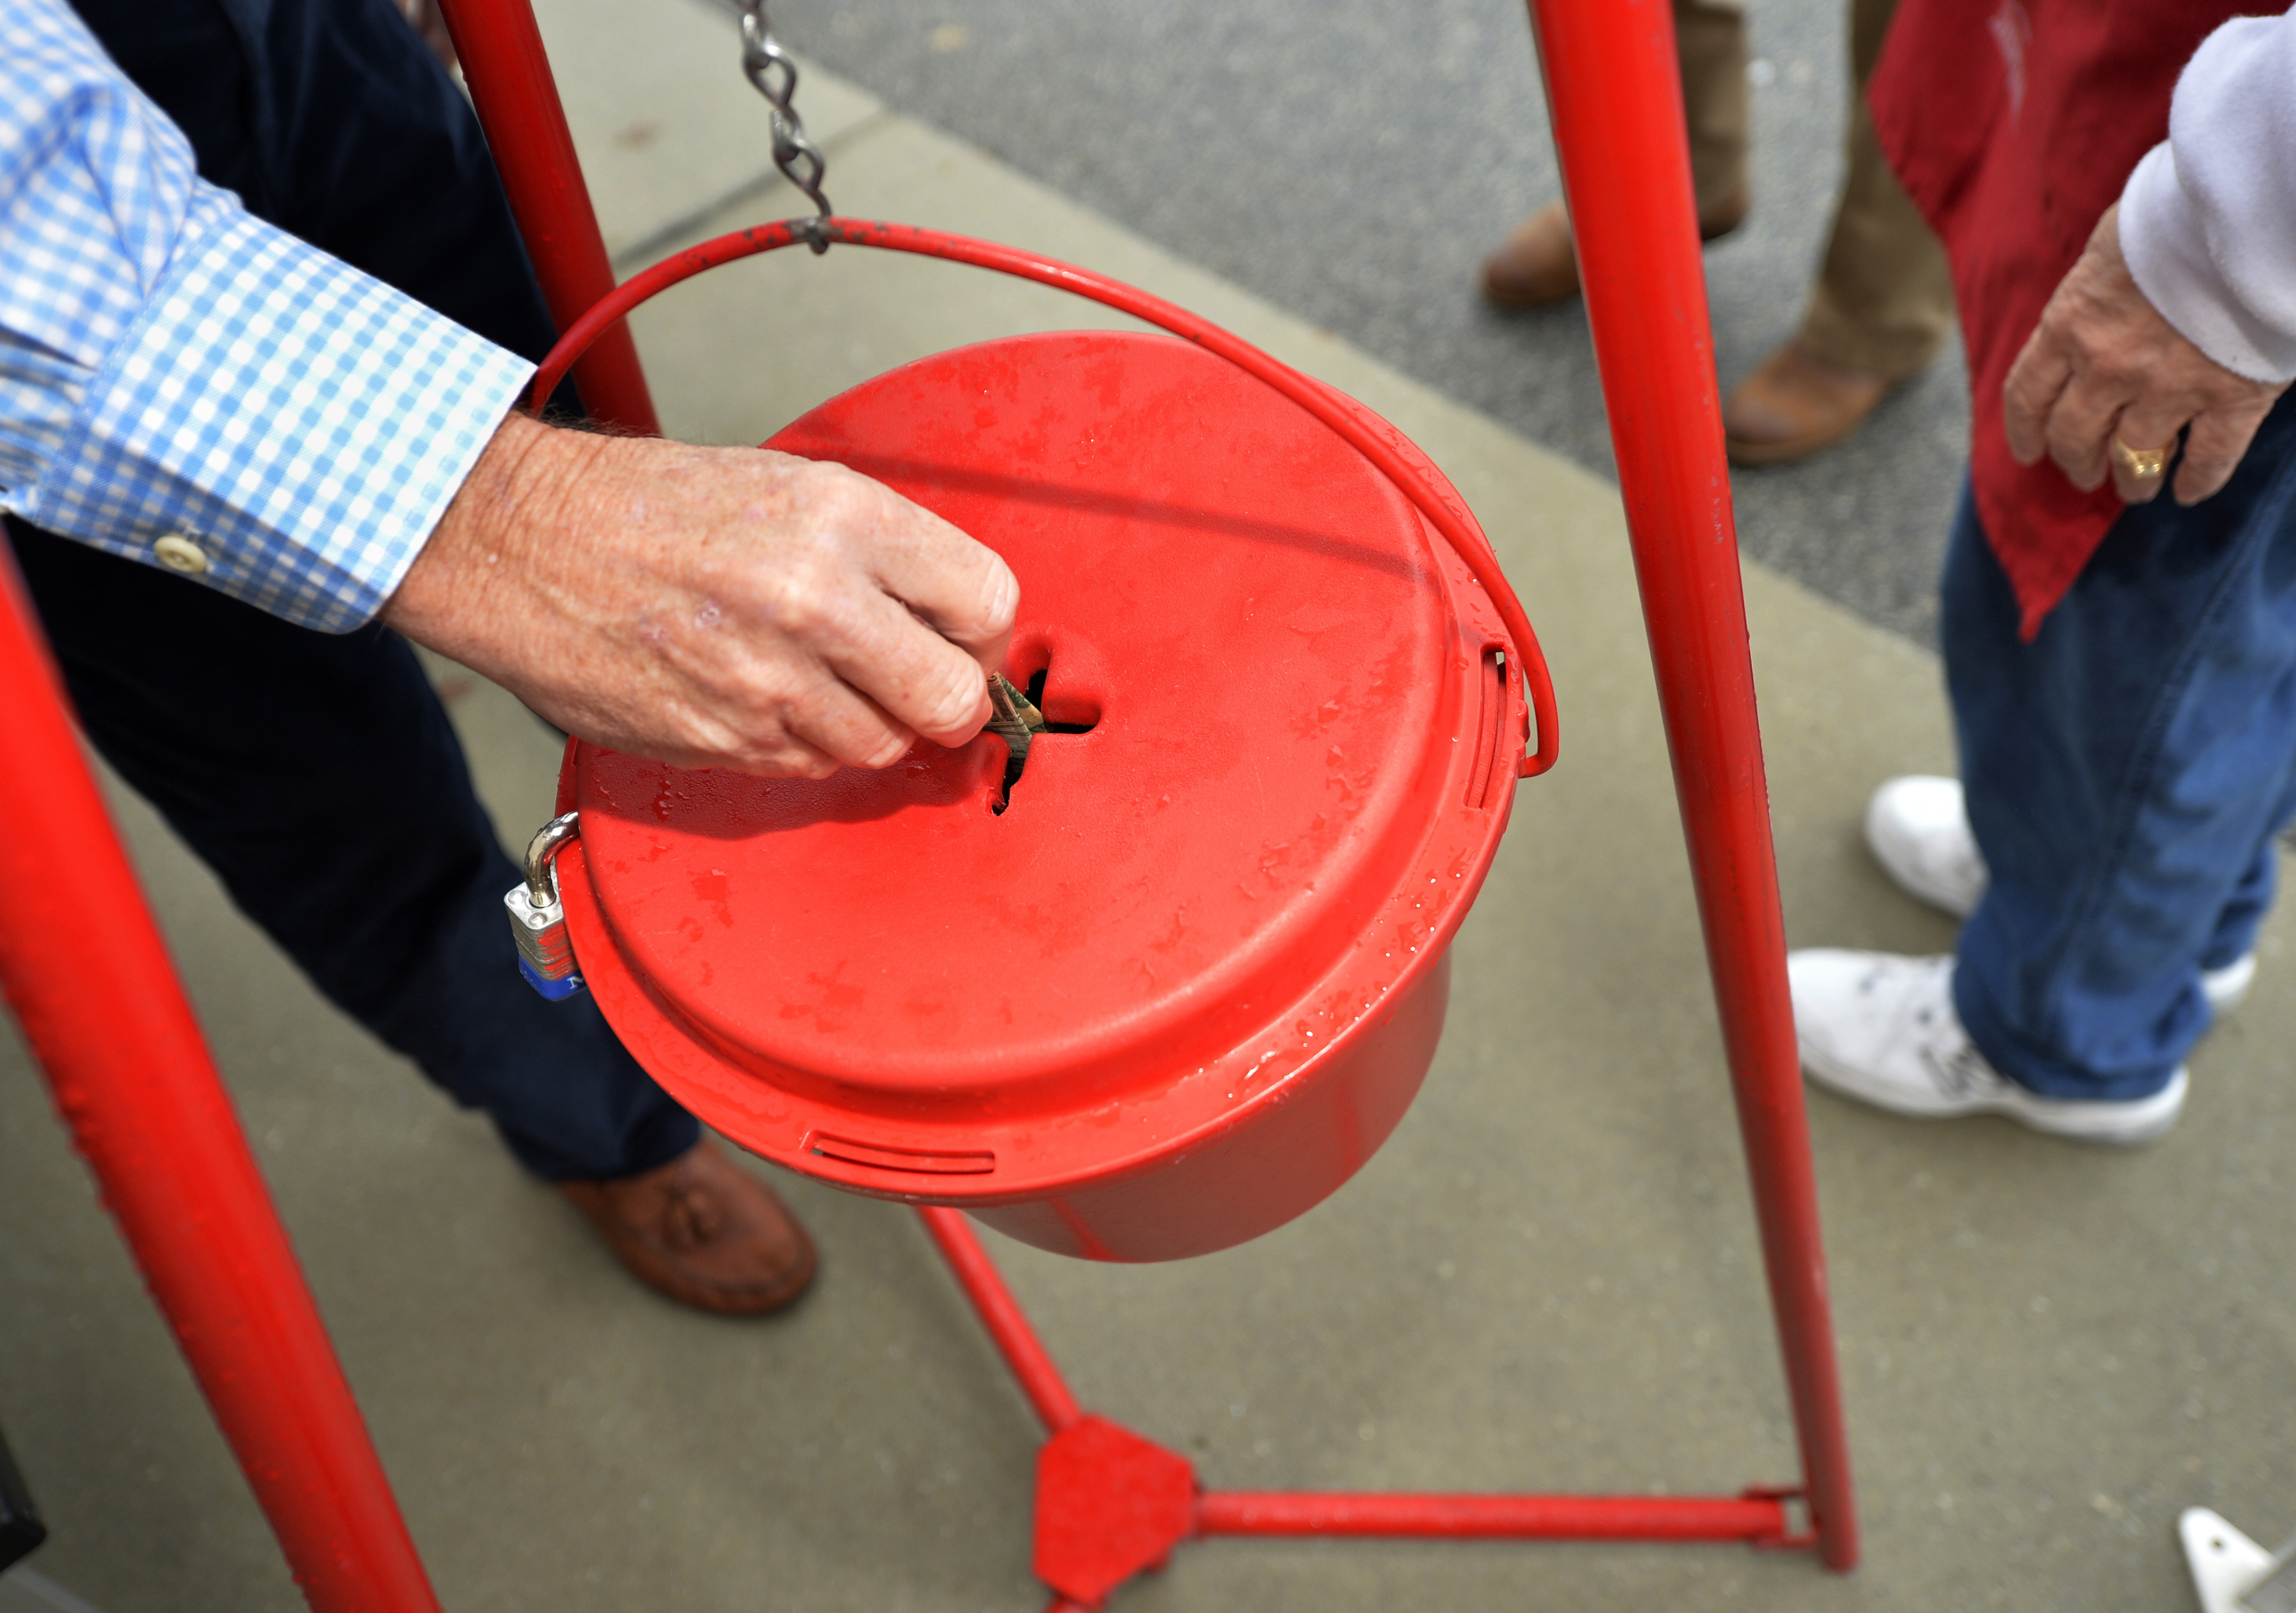 Salvation Army Christmas Kettle Campaign, Local Missions